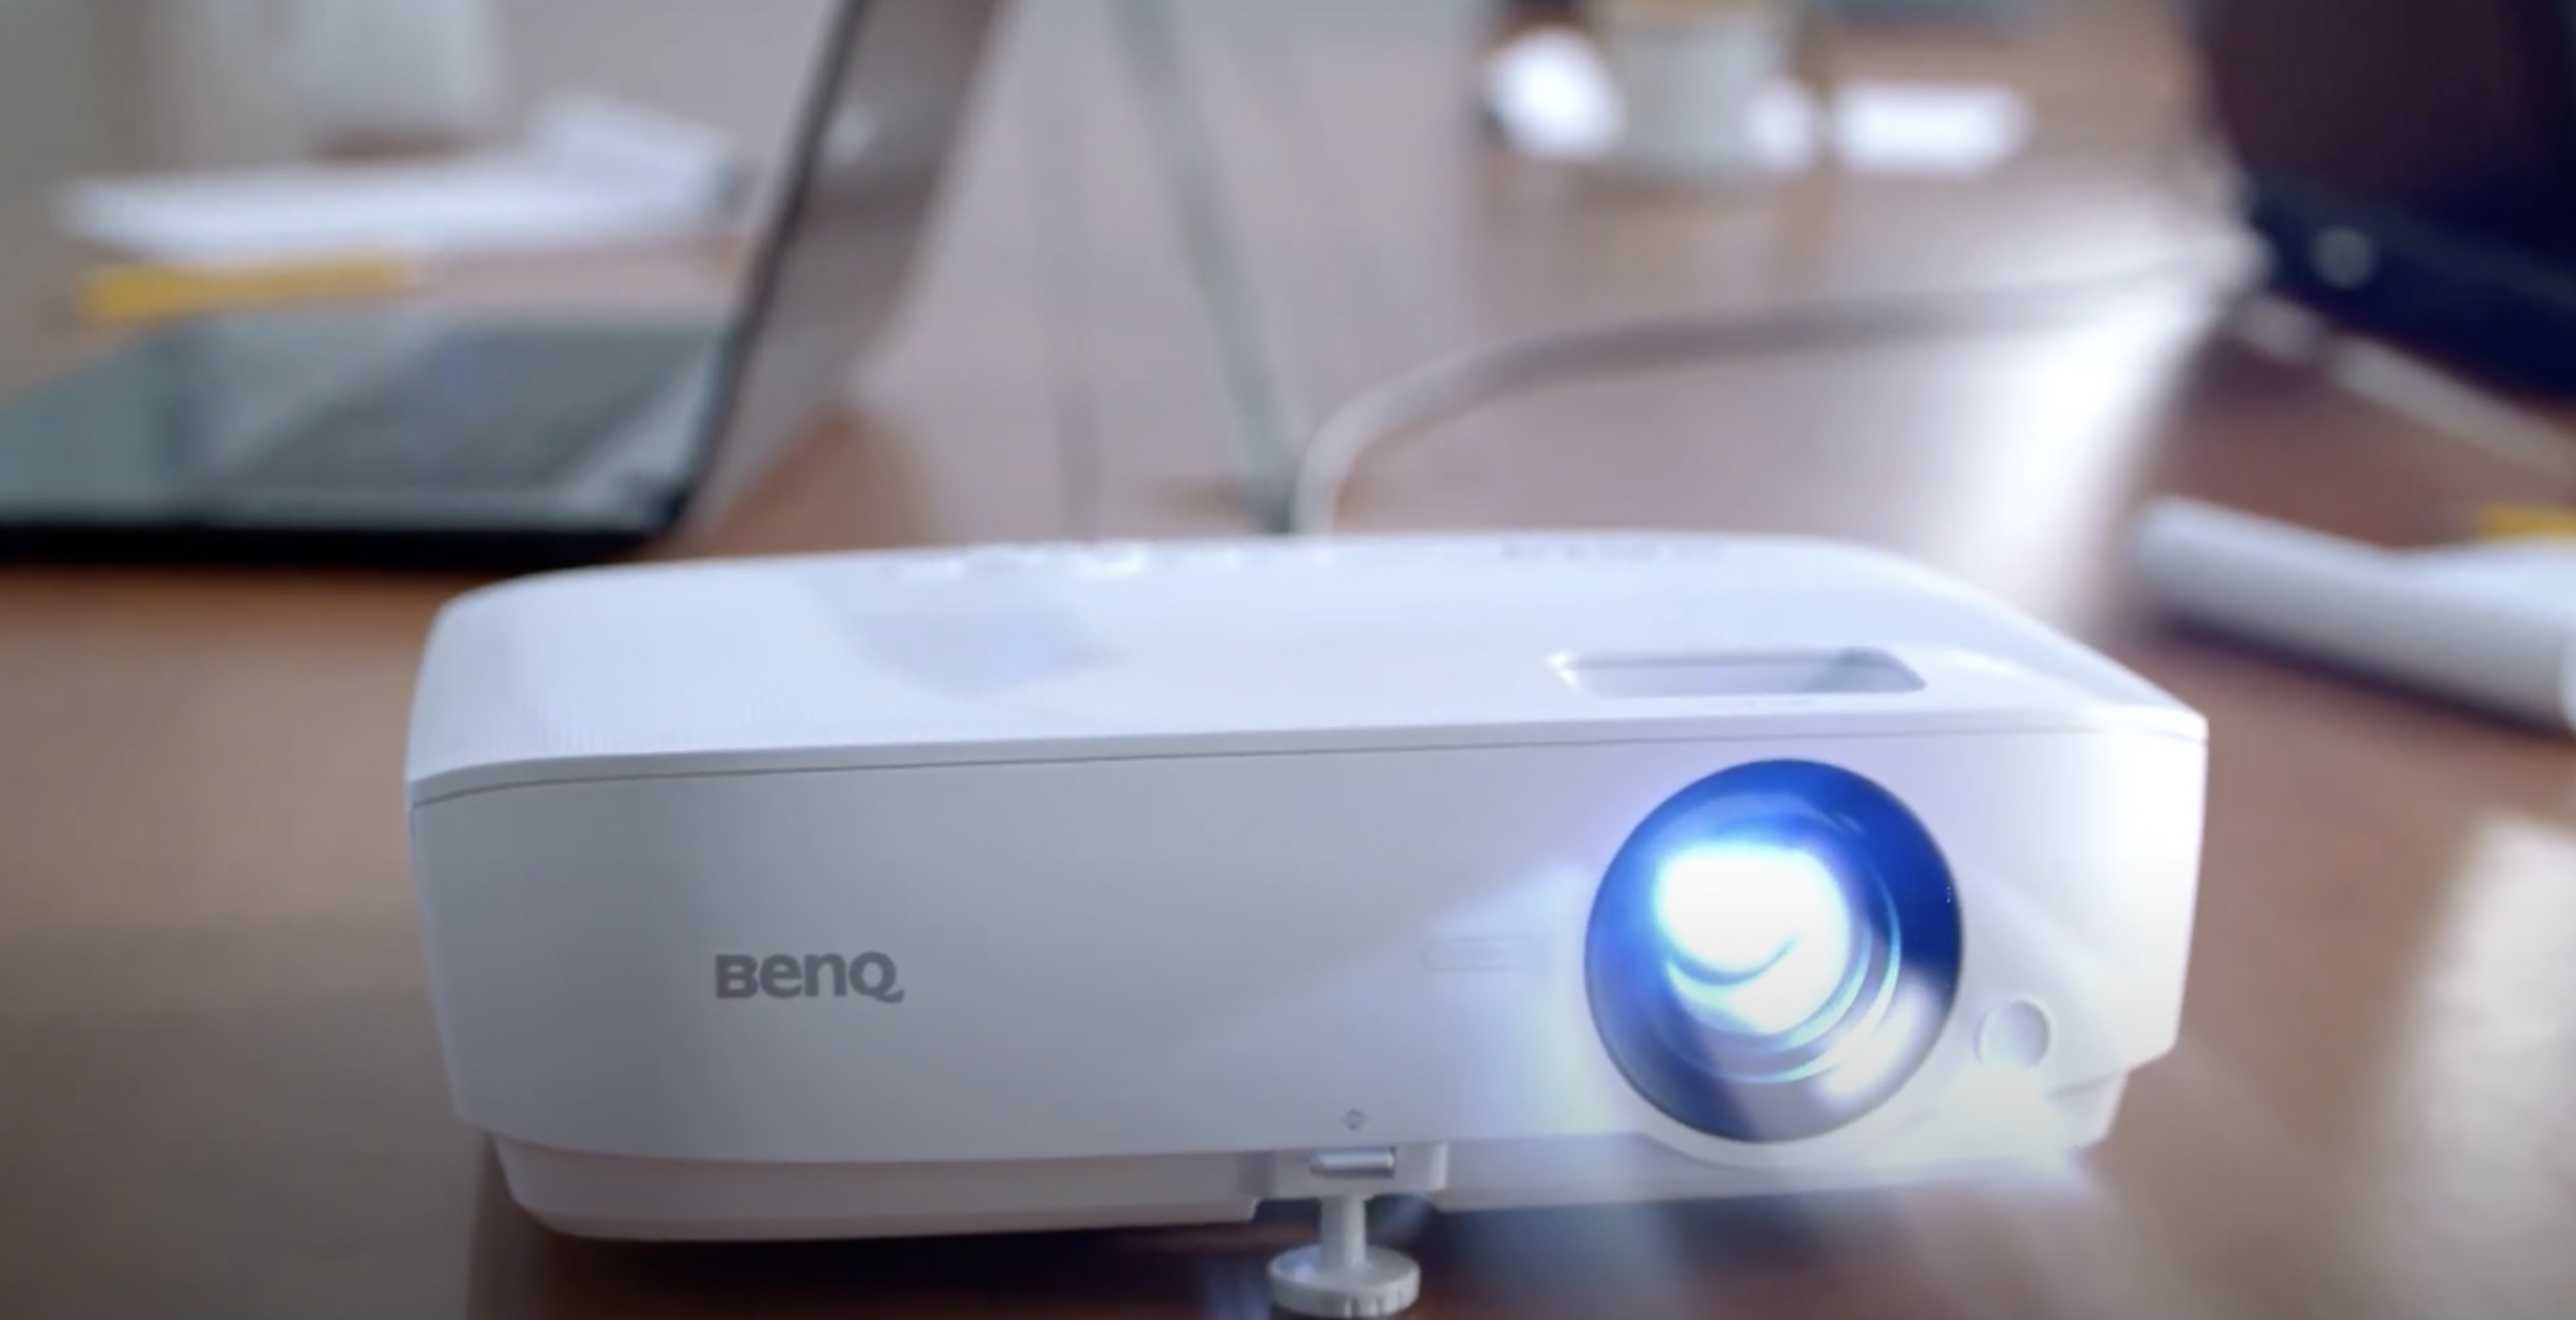 How To Adjust Screen Size In BenQ Projector